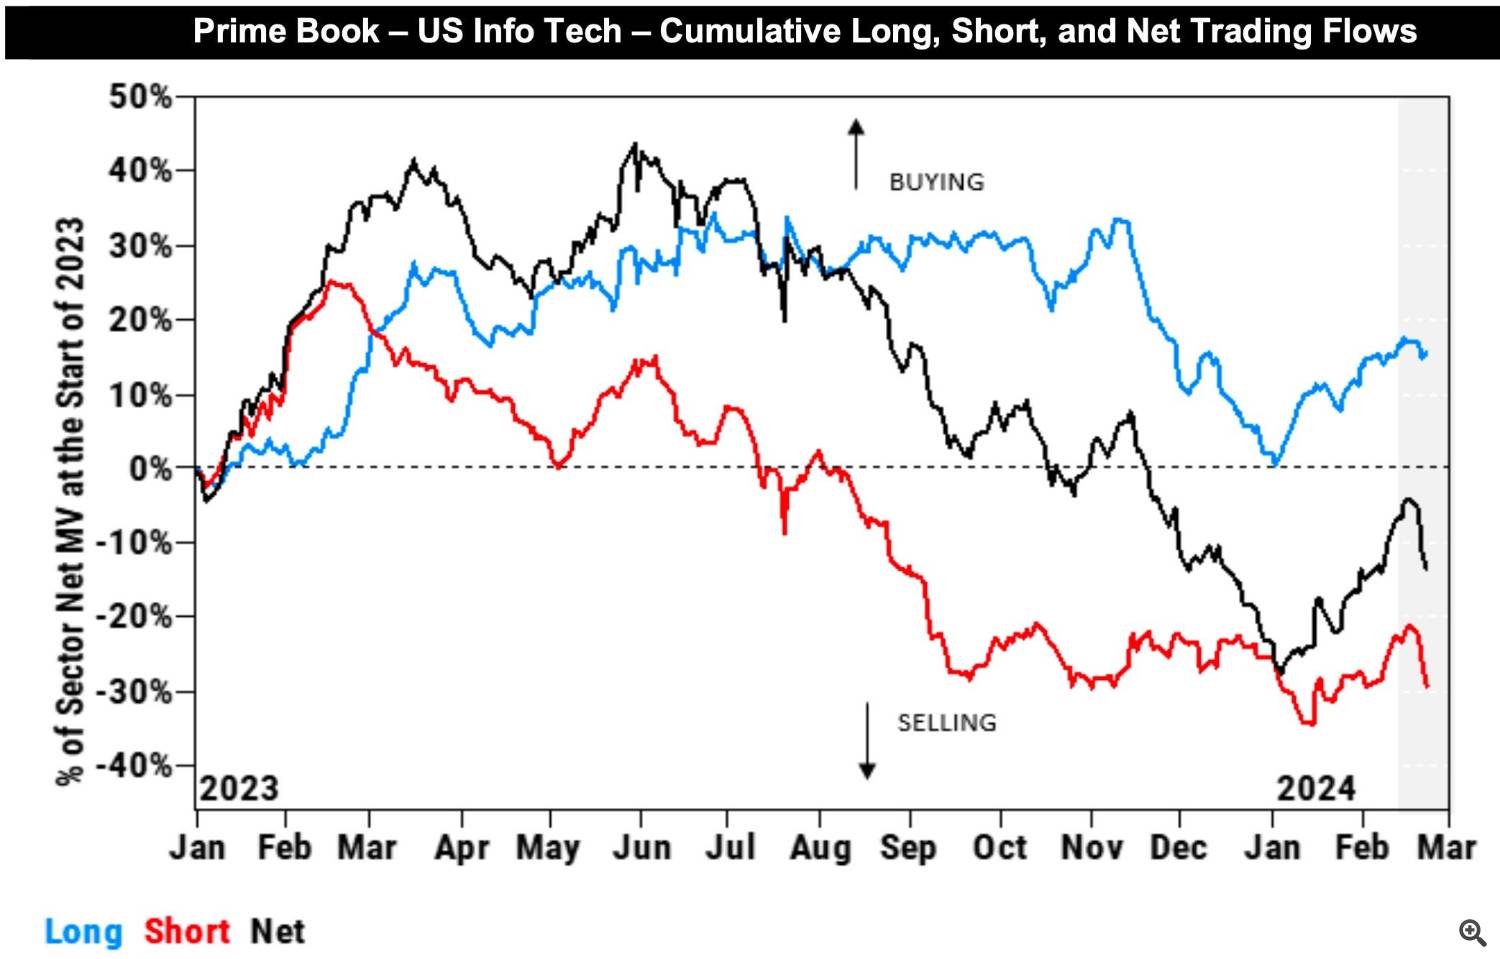 Hedge fund flows into US technology stocks